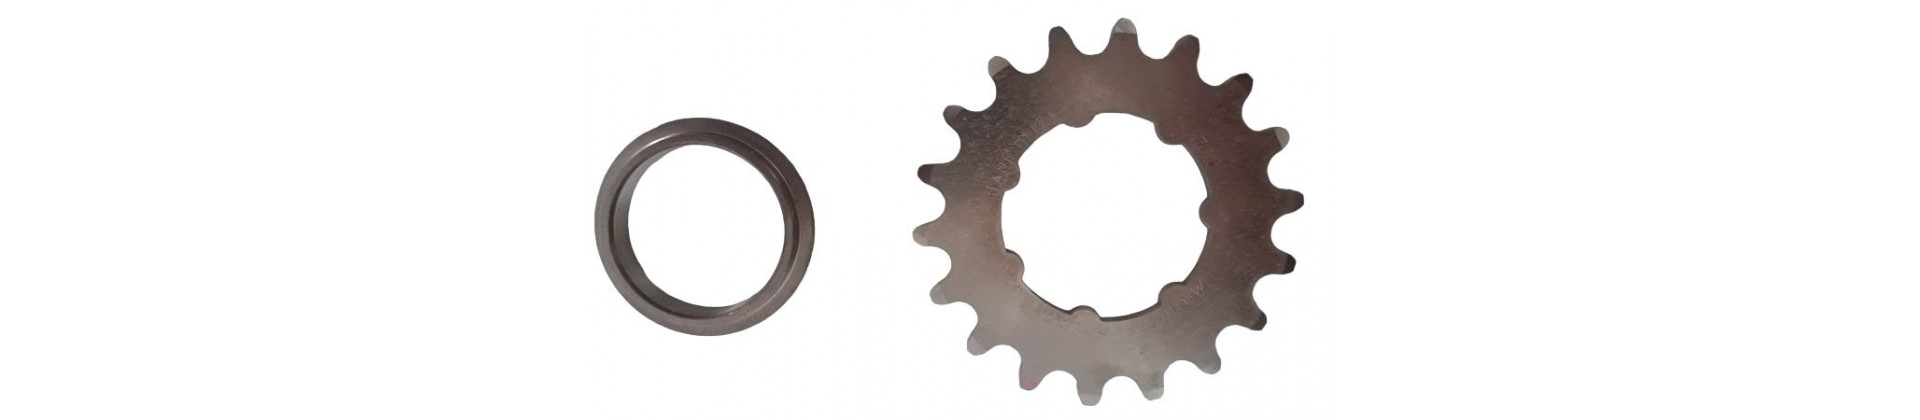 Fixie chain and sprocket